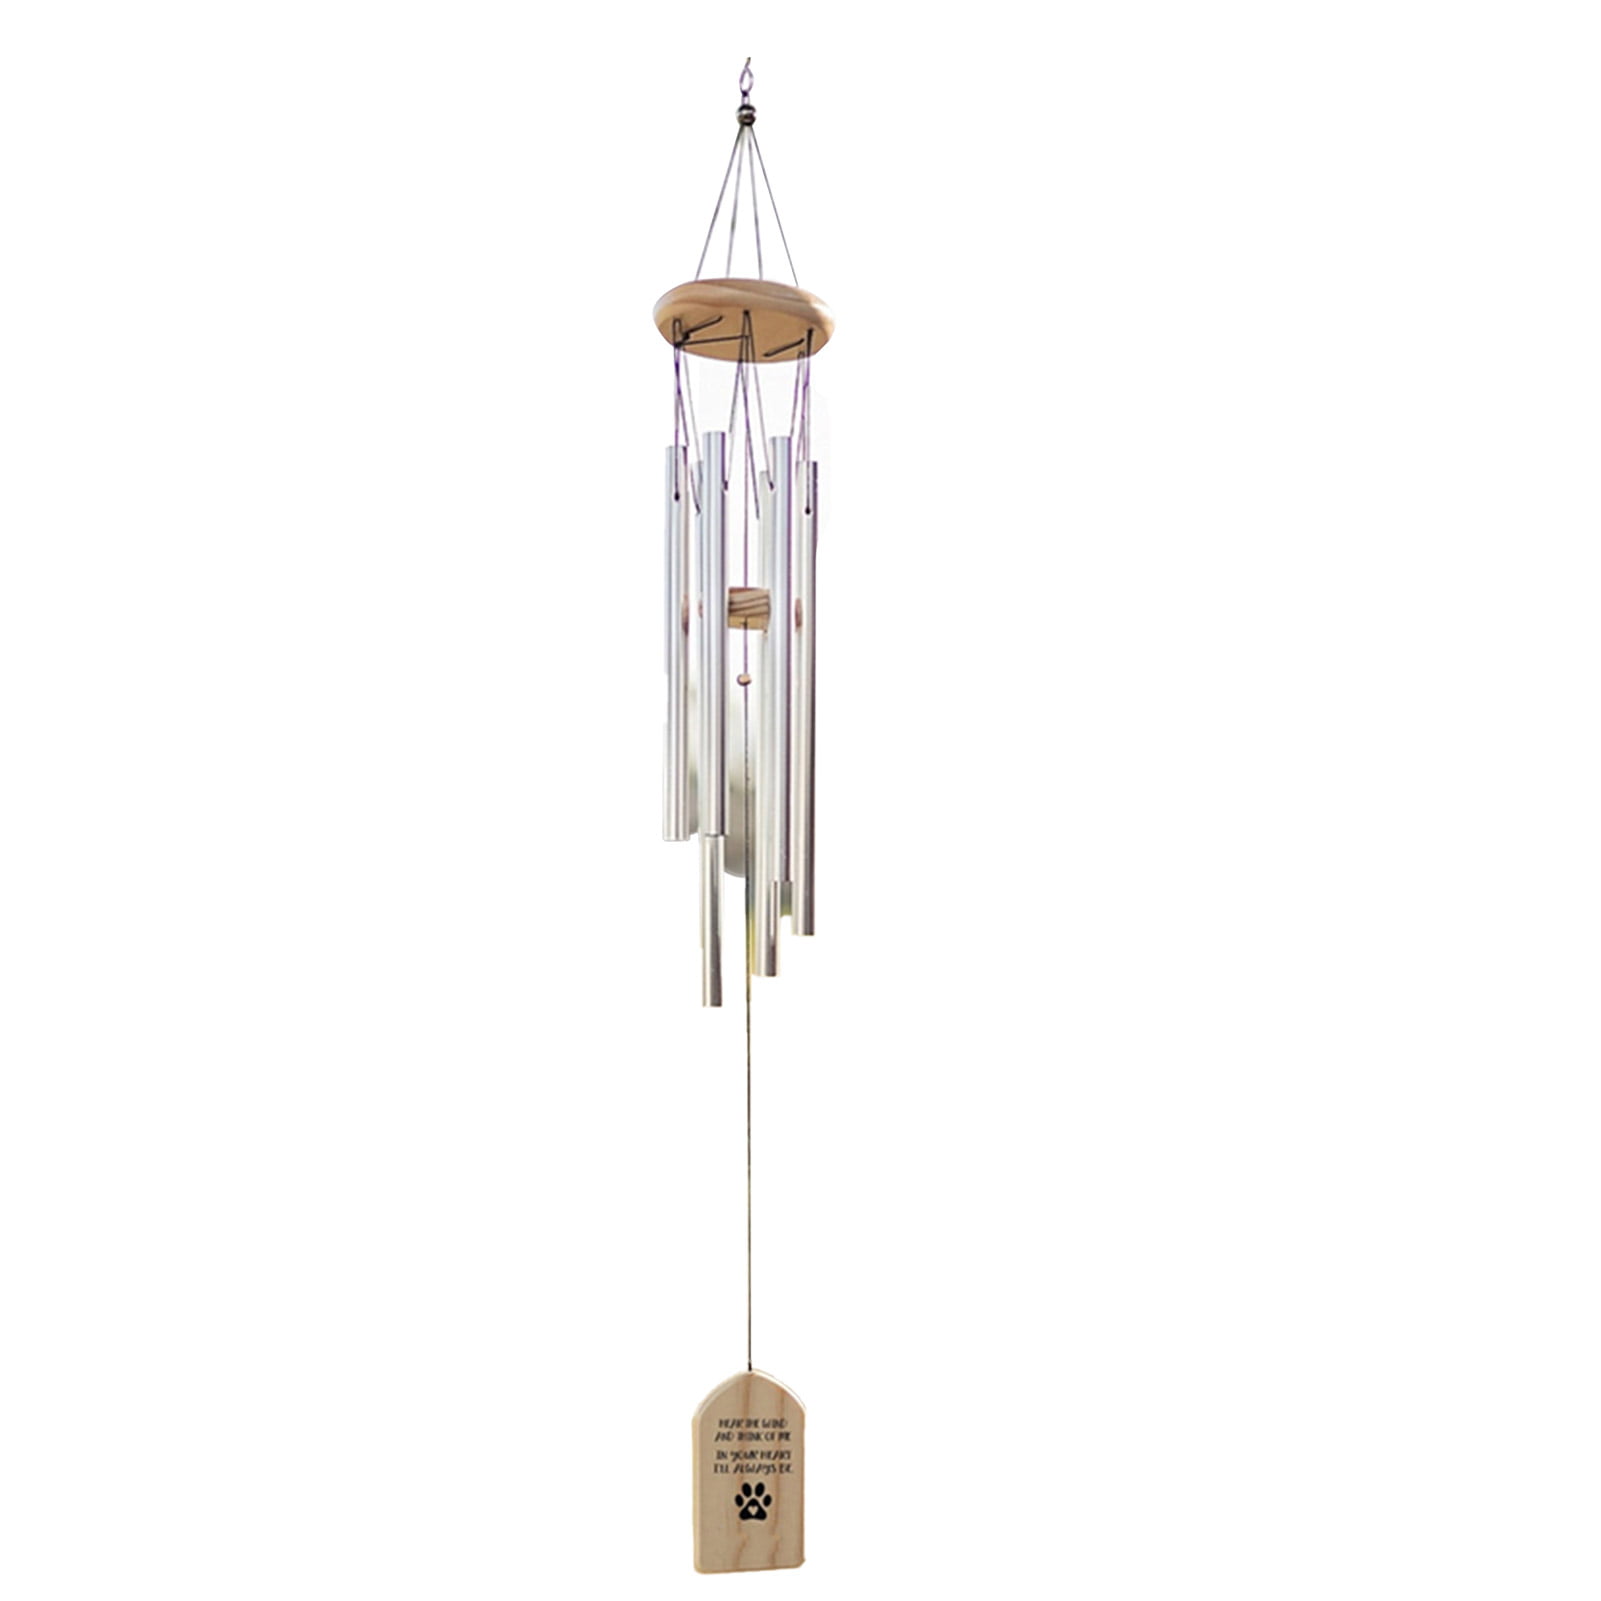 Pet Memorial Wind ChimesSympathy Gift and Remembrance for Loss of Dog or Cat 